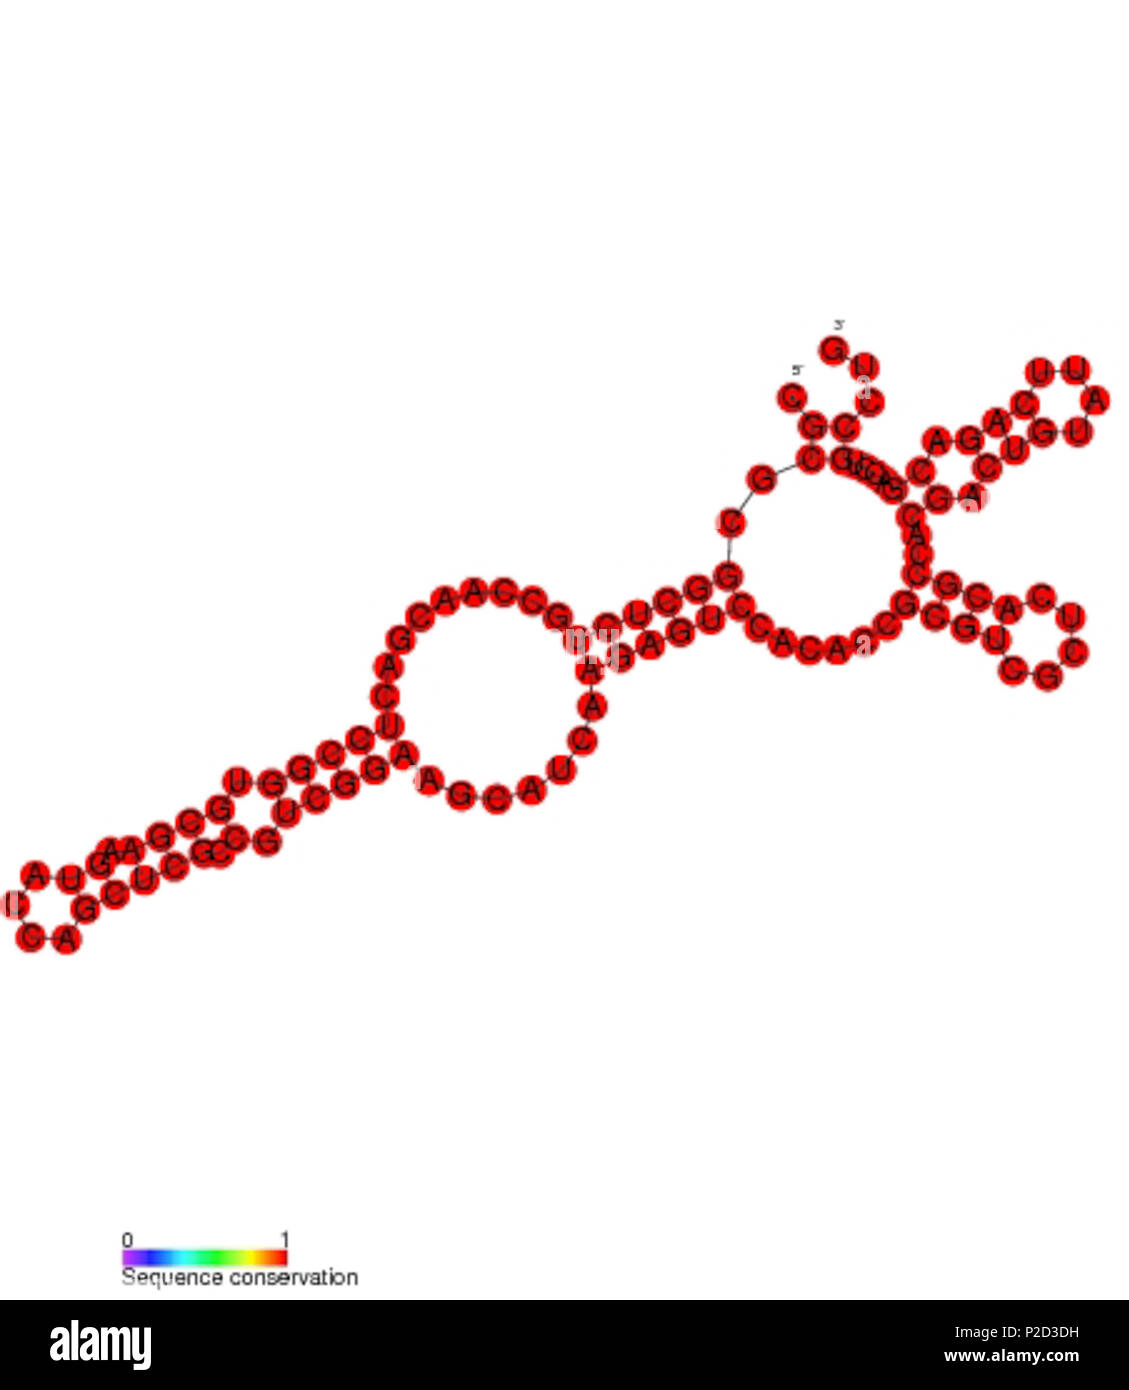 . Secondary structure and sequence conservation image for AS1890 non coding RNA (RF01780). Nucleotide colouring indicates sequence conservation between the members of this family. May 2011. Rfam database 5 AS1890 secondary structure Stock Photo